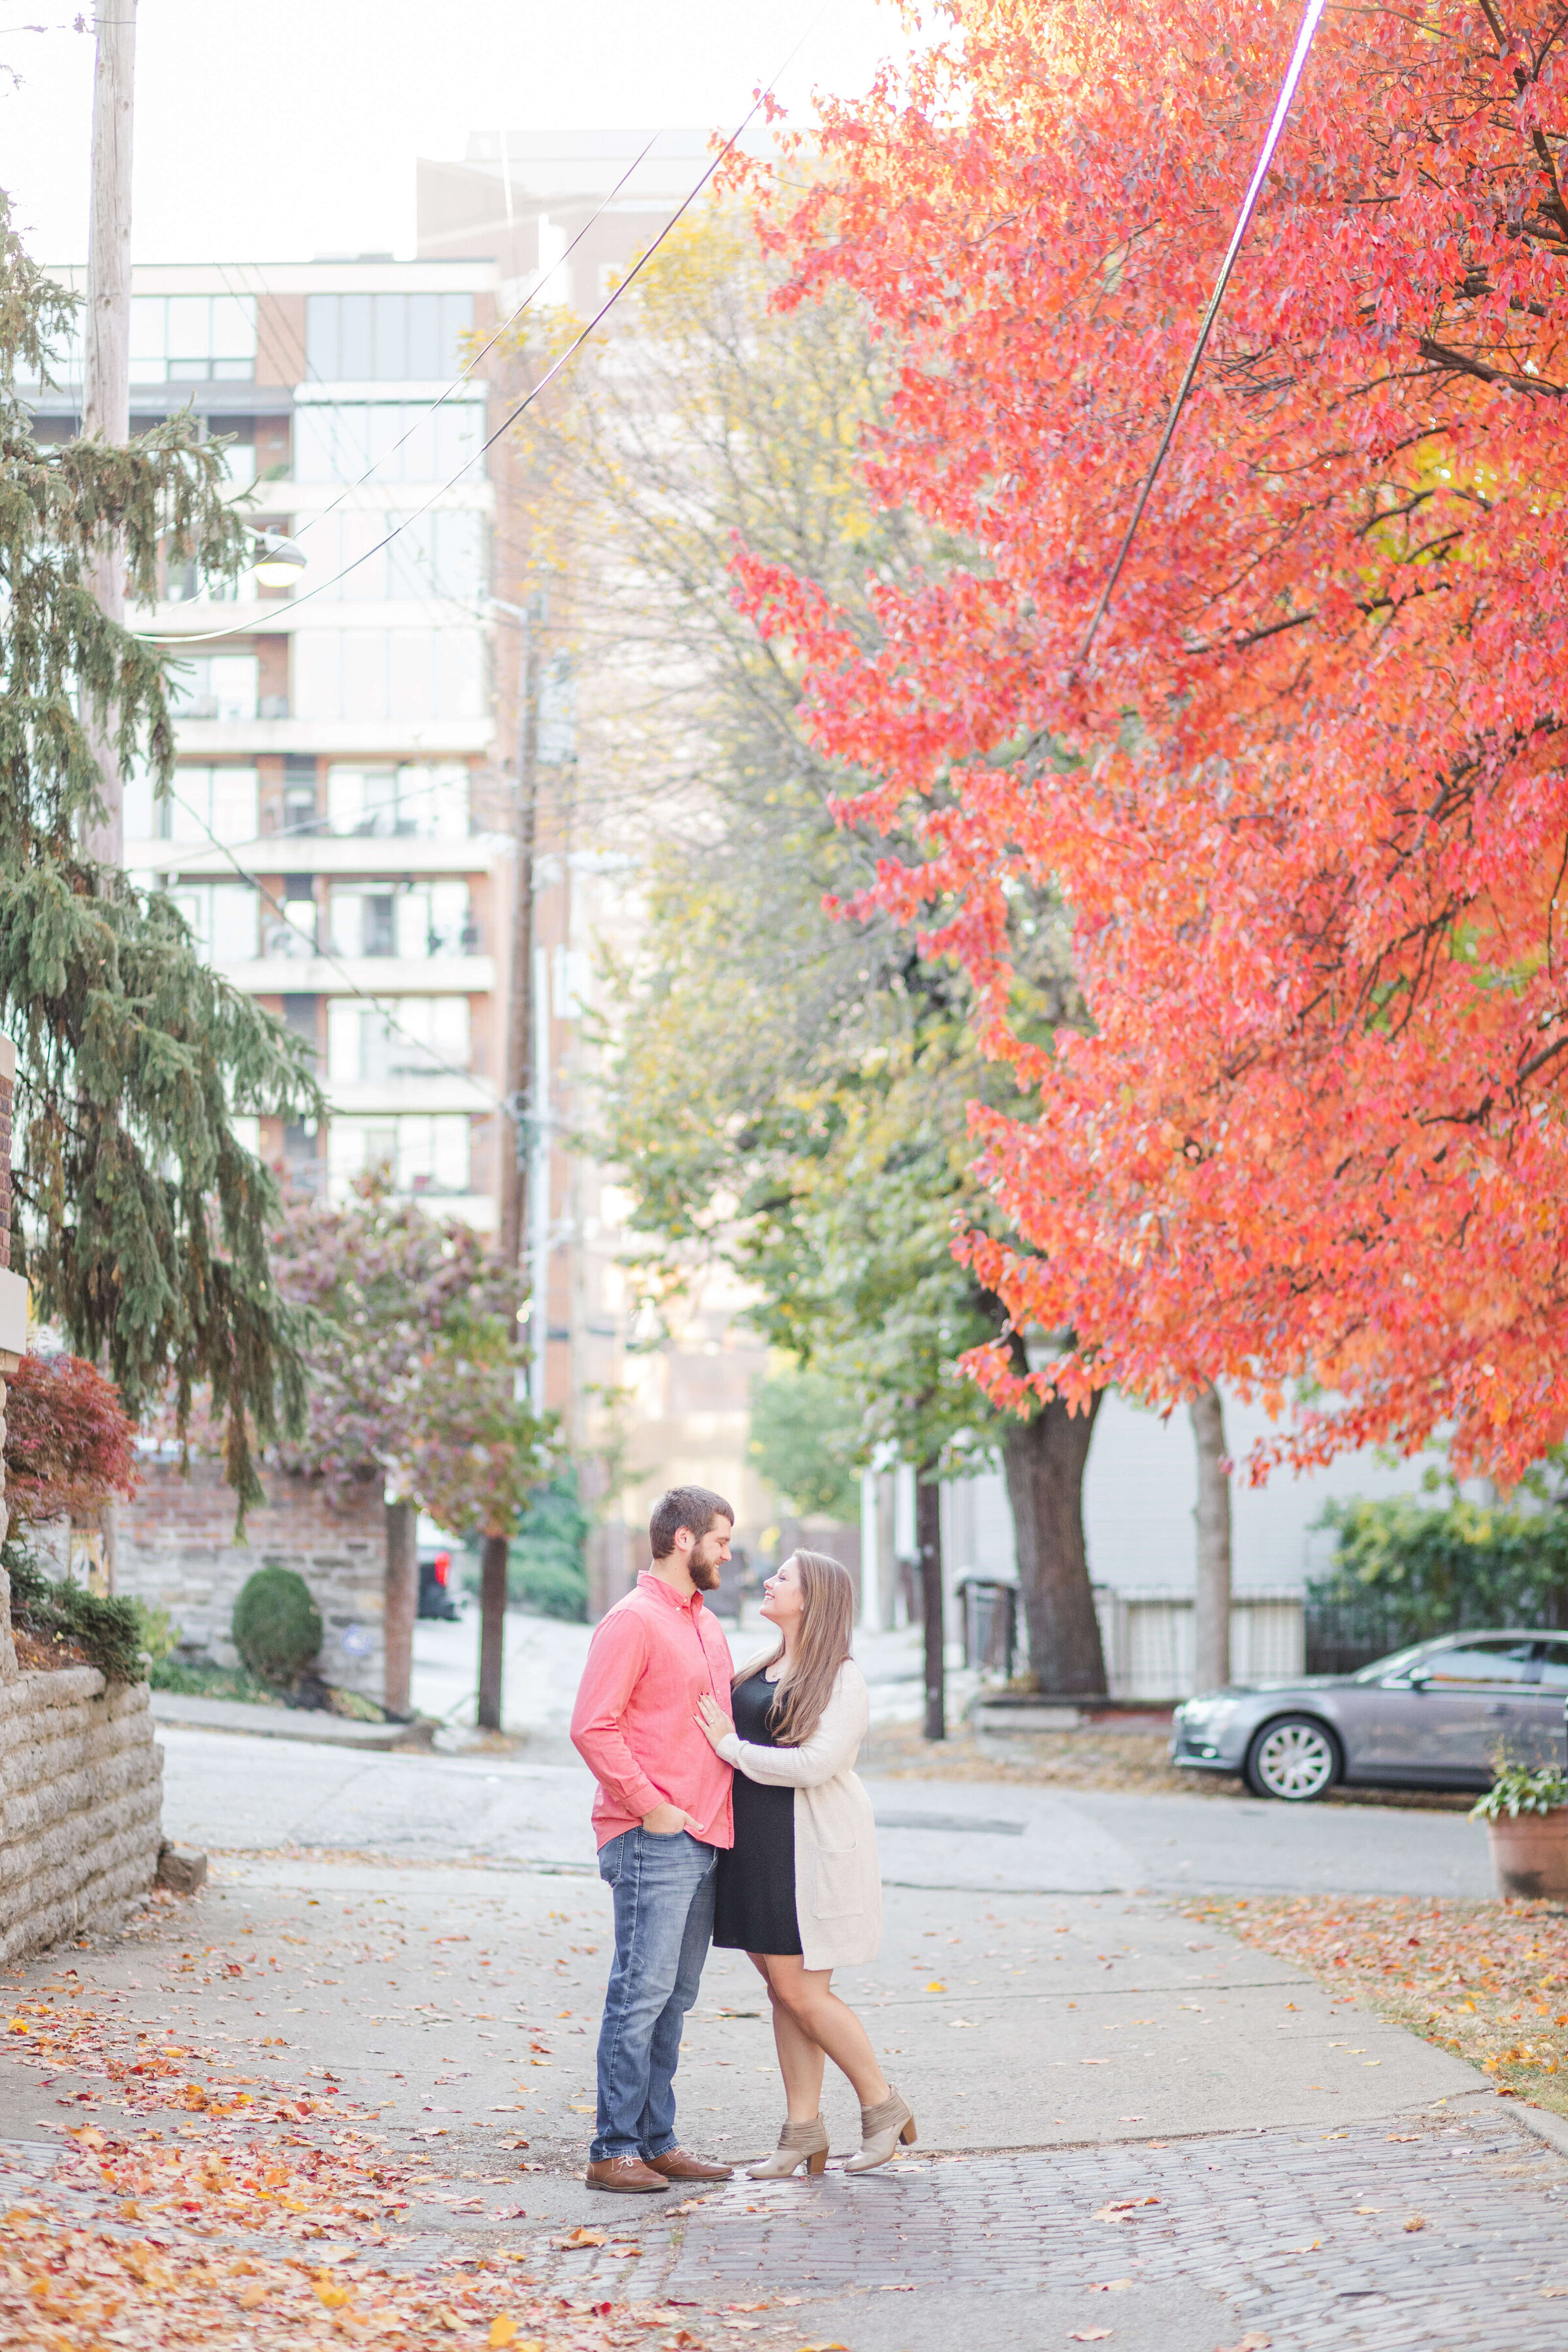 A man and woman hold each other in a downtown covington kentucky park. It's a wide shot with red fall trees in the background. She's wearing a black dress and he's in jeans and a red shirt. Taken by a kentucky wedding photographer